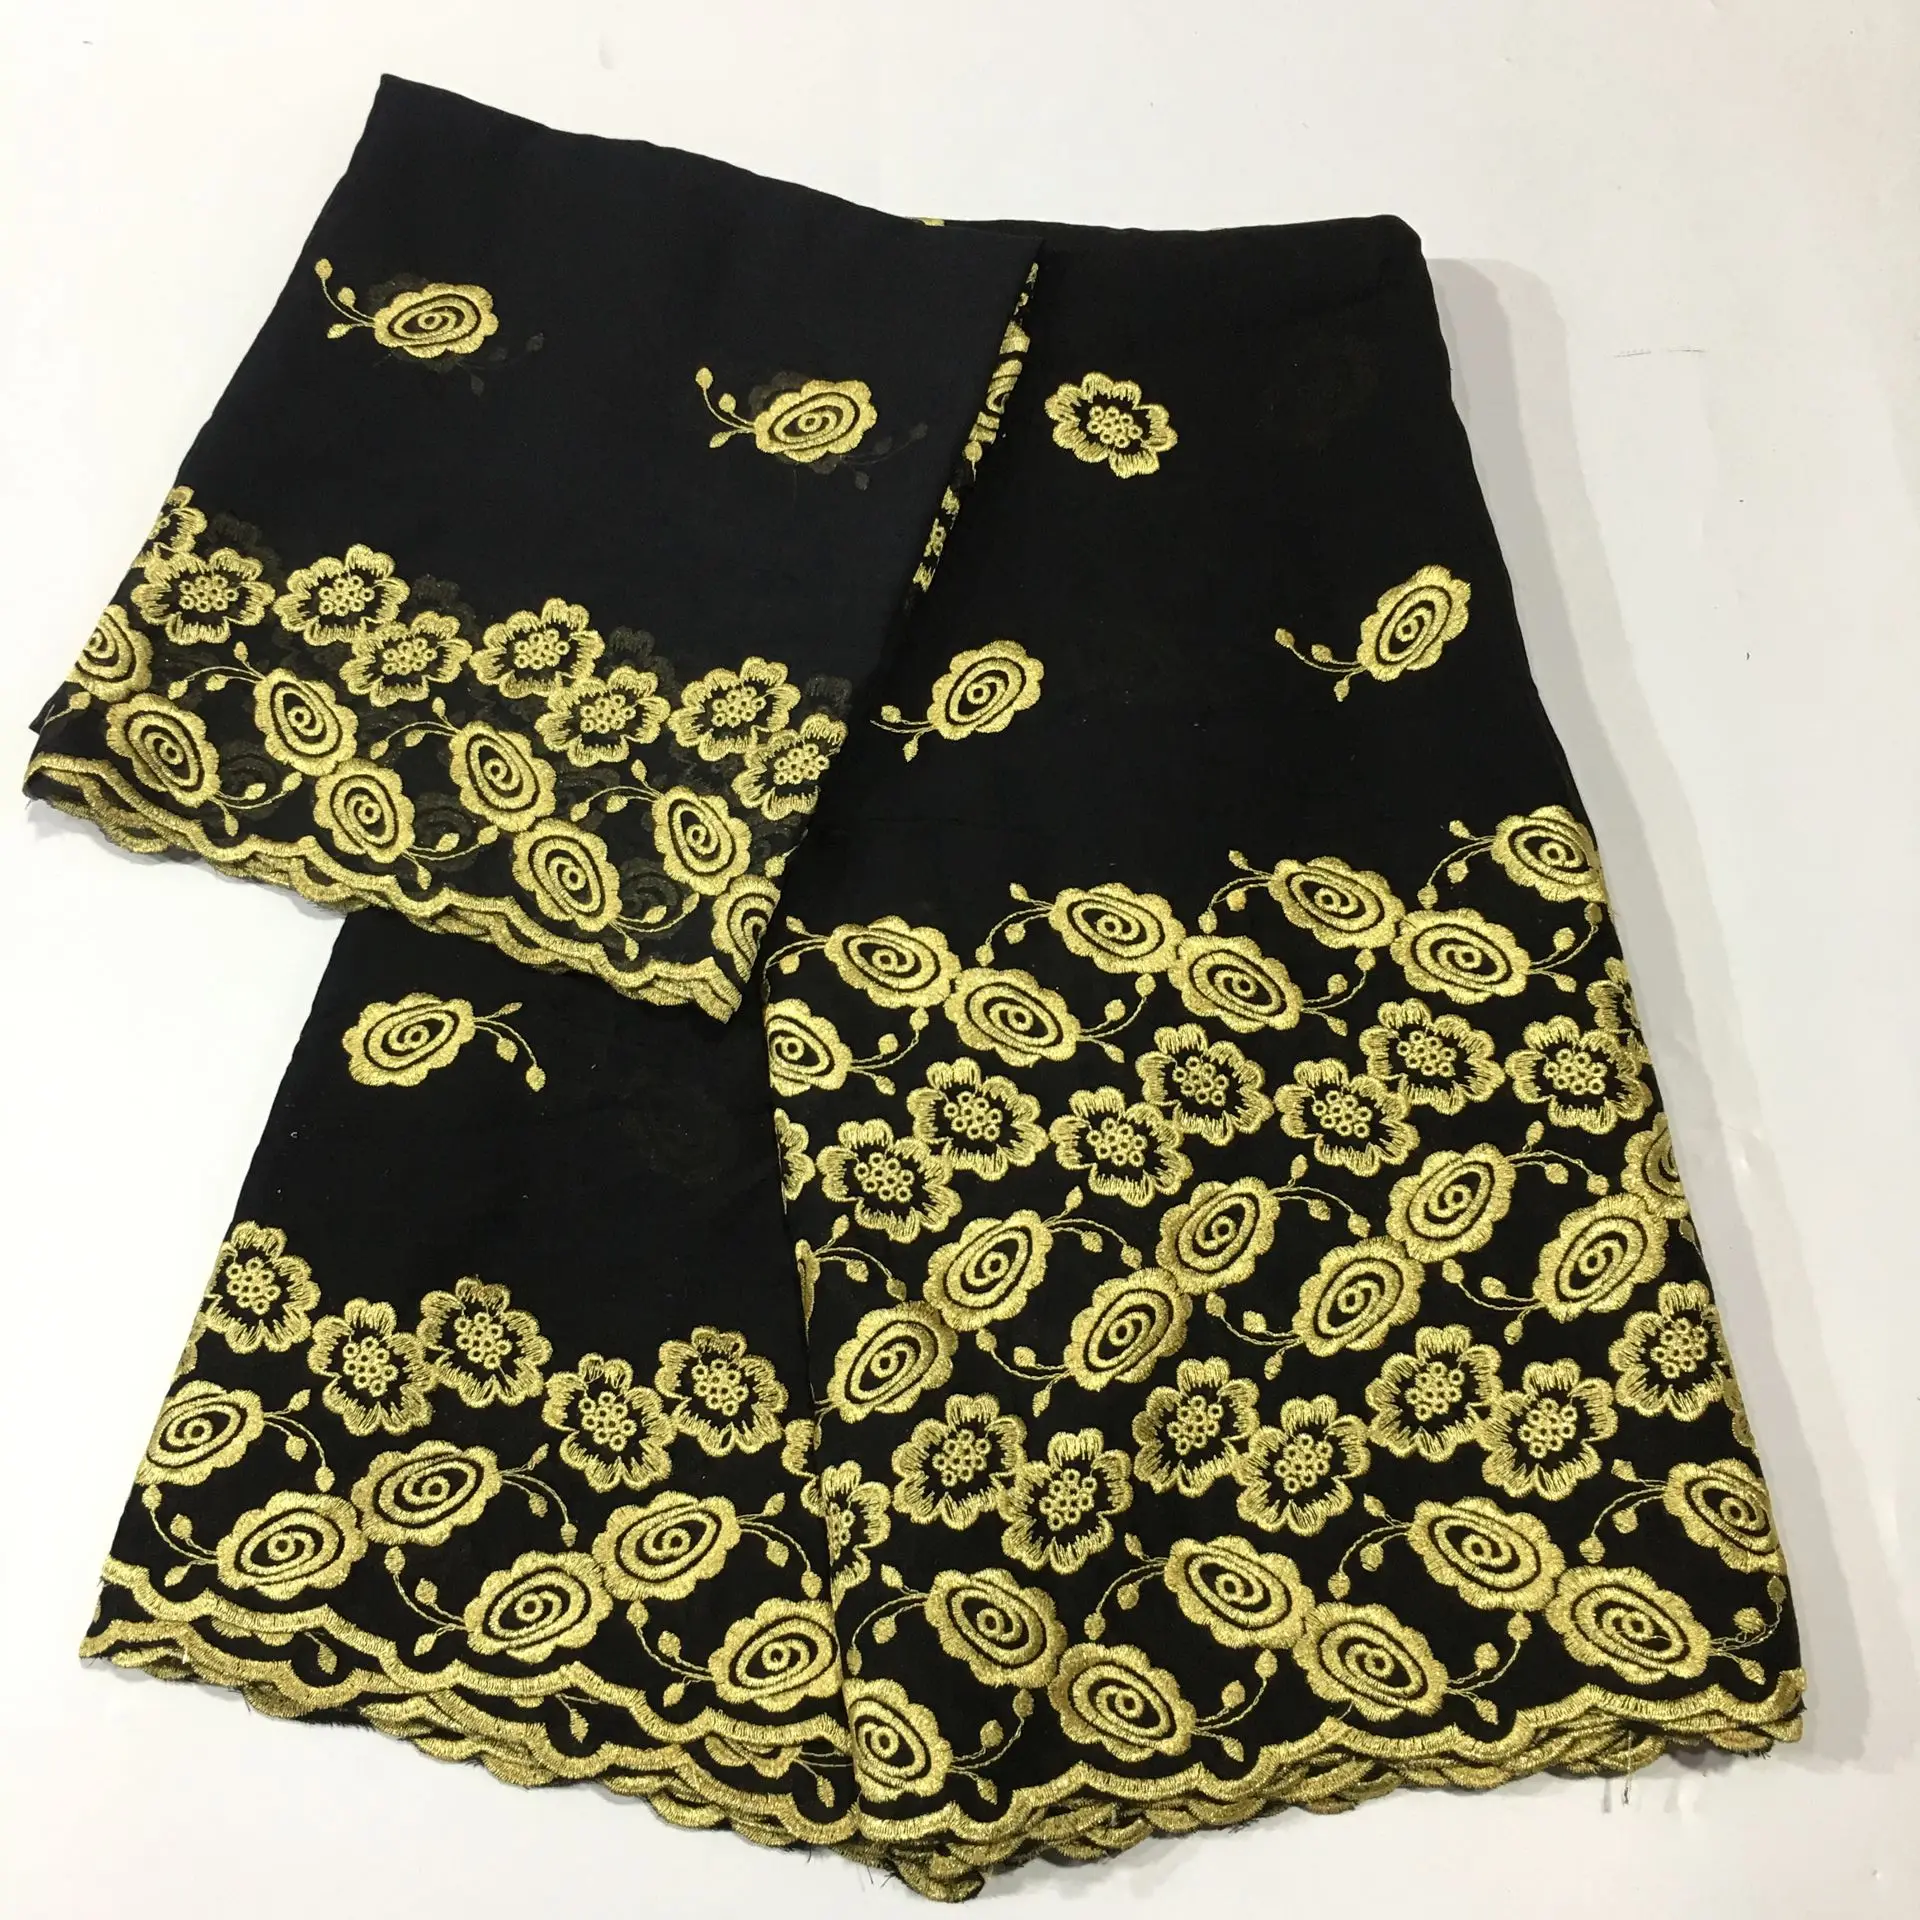 New Arrivals Cheap 5+2 Multicolor Swiss Voile Lace in Switzerland 100% Cotton Fabric African Swiss Voile Lace High Quality Dress